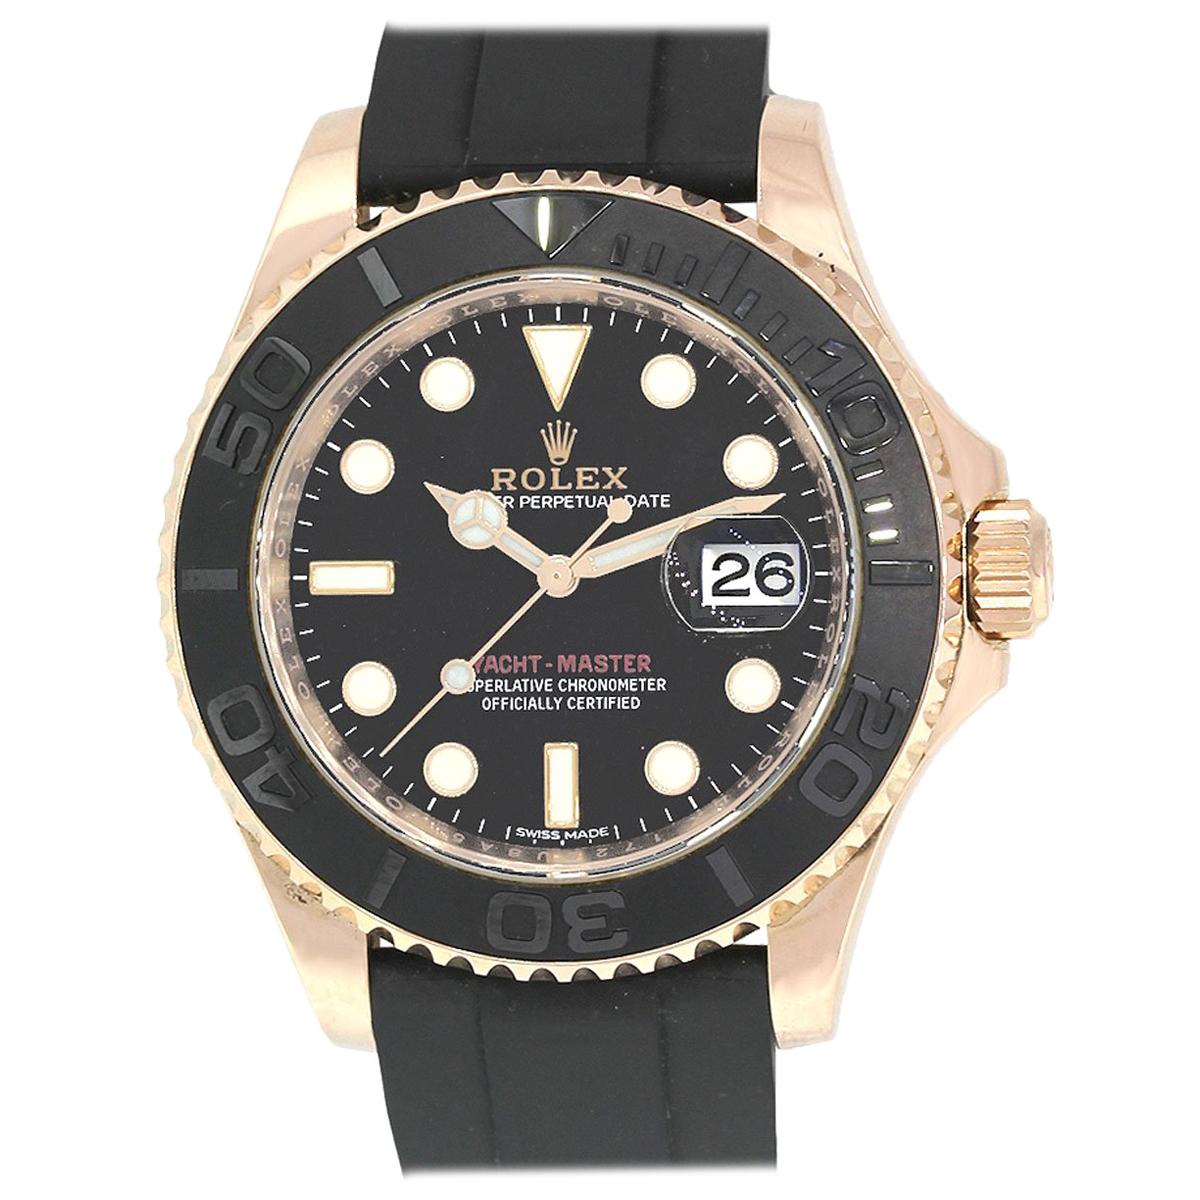 Rolex 116655 Yacht Master Black Dial on Rubber Strap Watch